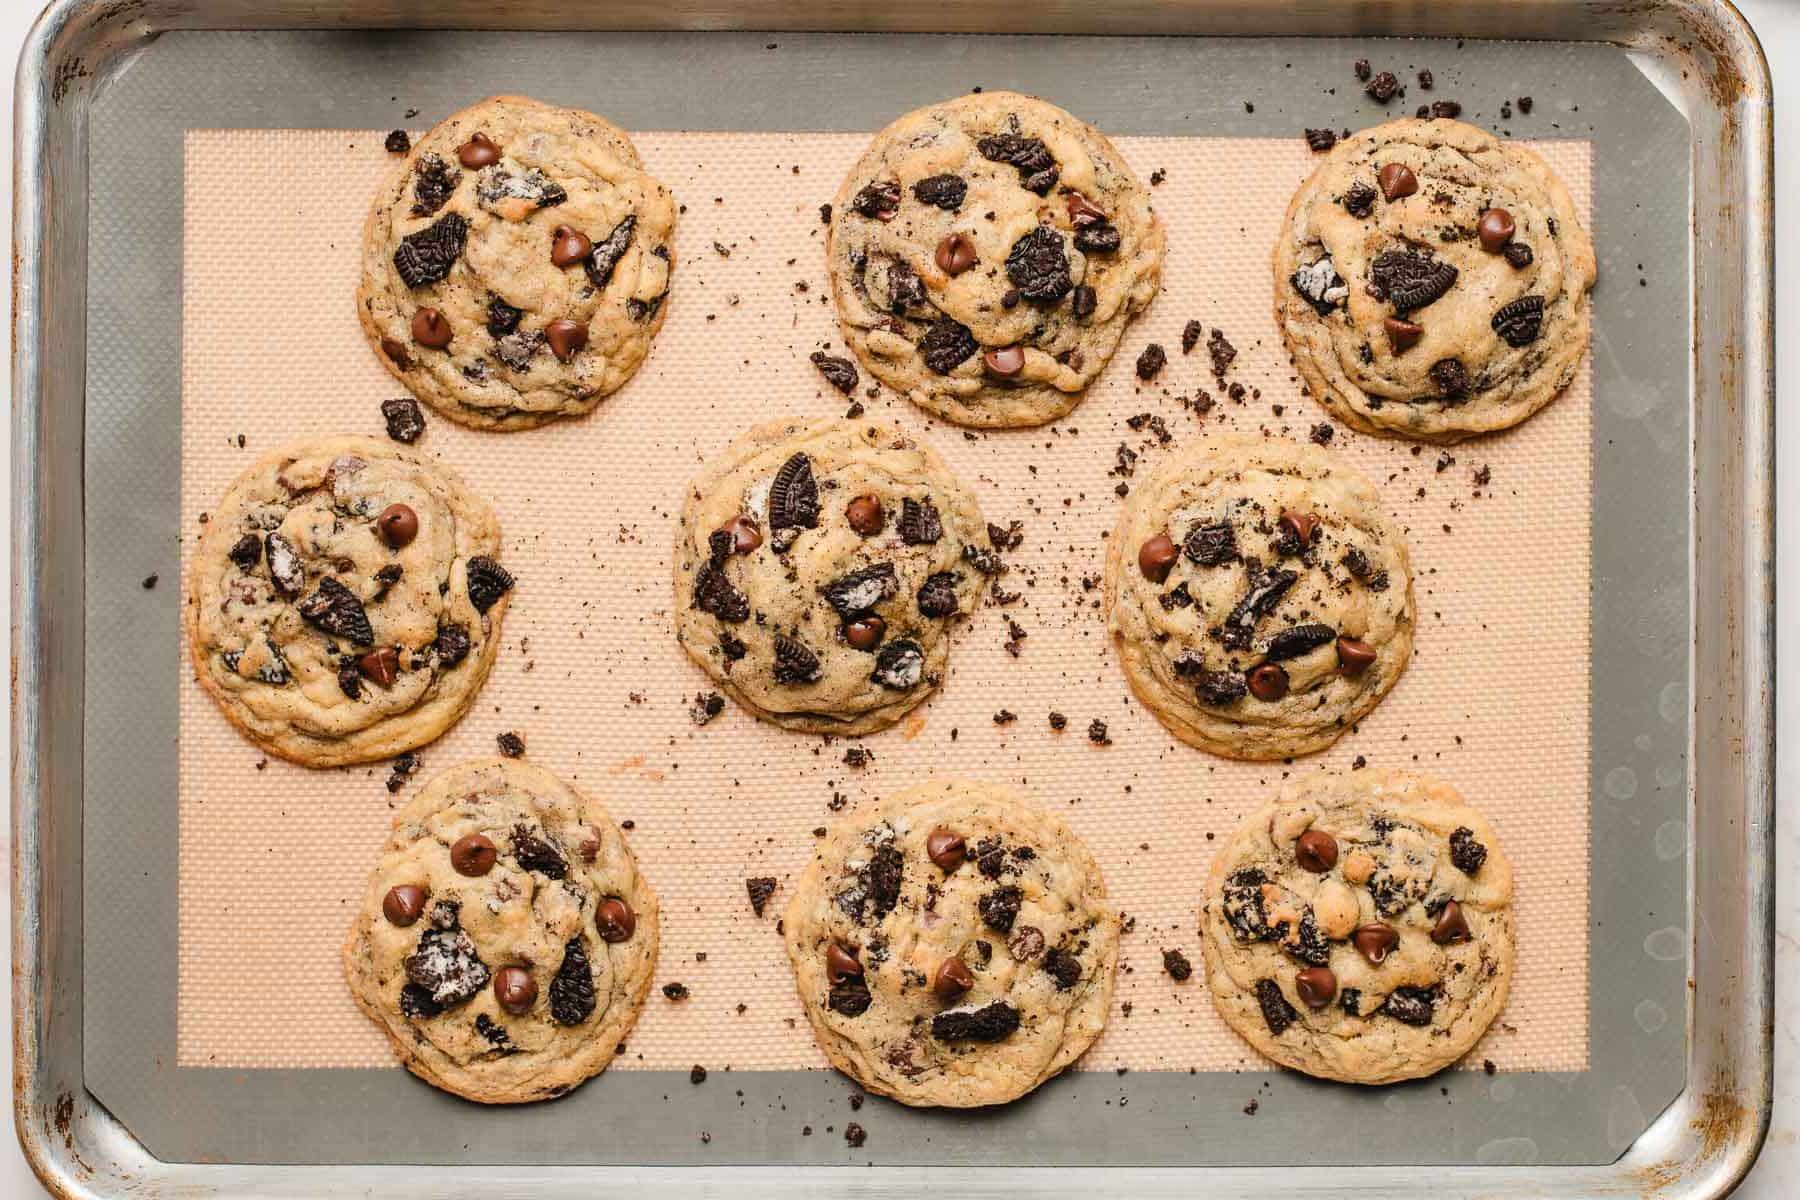 Freshly baked oreo chocolate chip cookies on a sheet pan.